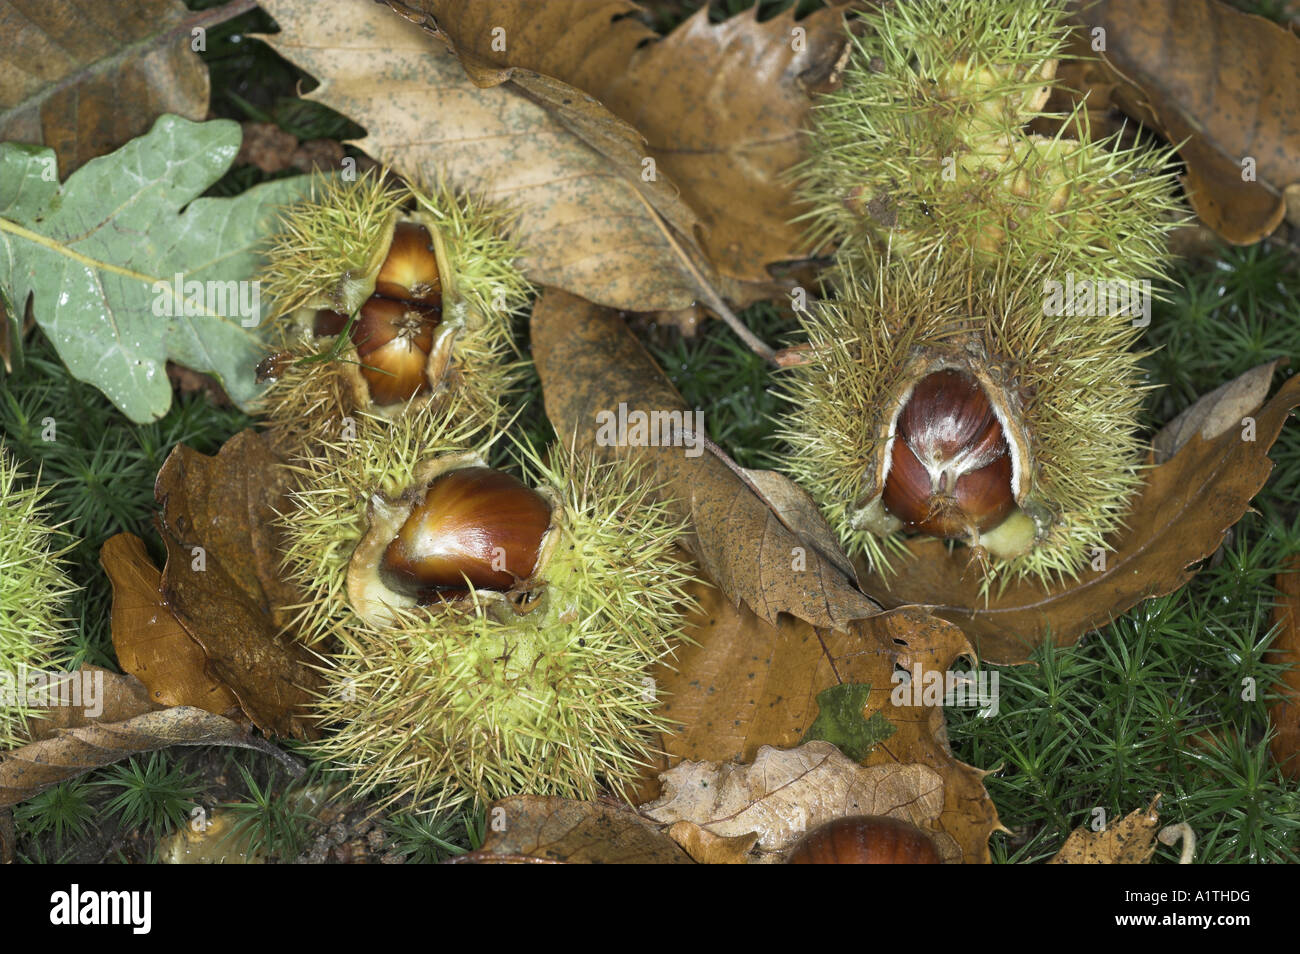 Sweet Chestnuts in Autumn woodland Stock Photo